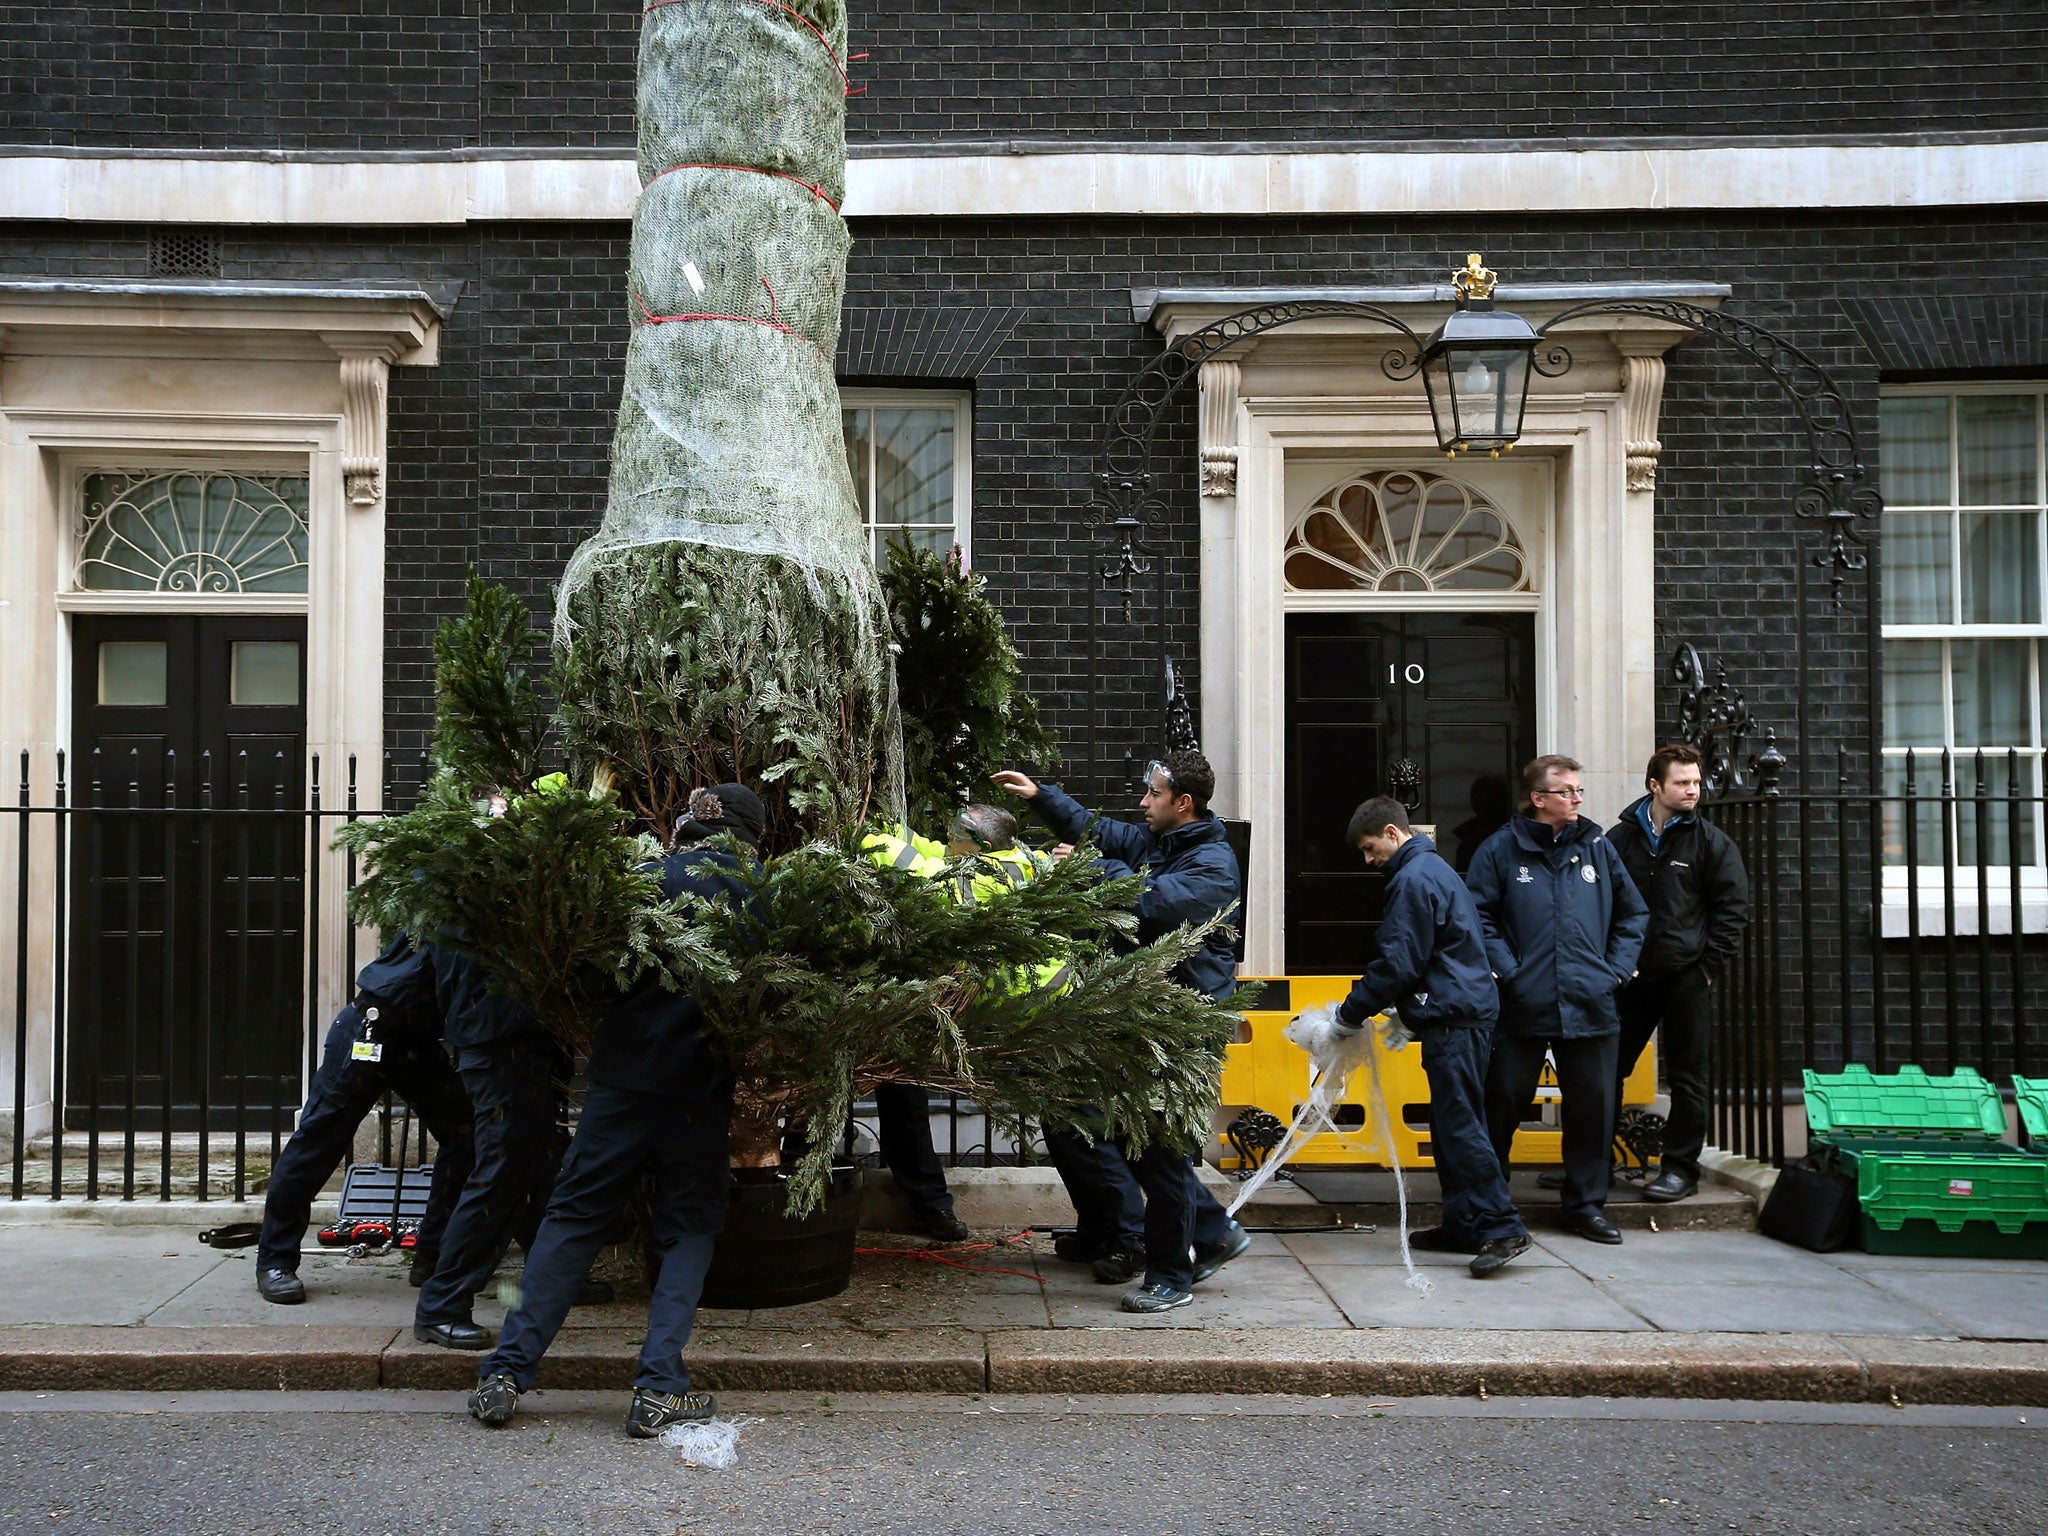 A Christmas Tree is moved into position on Downing Street on November 30, 2012 in London, England.